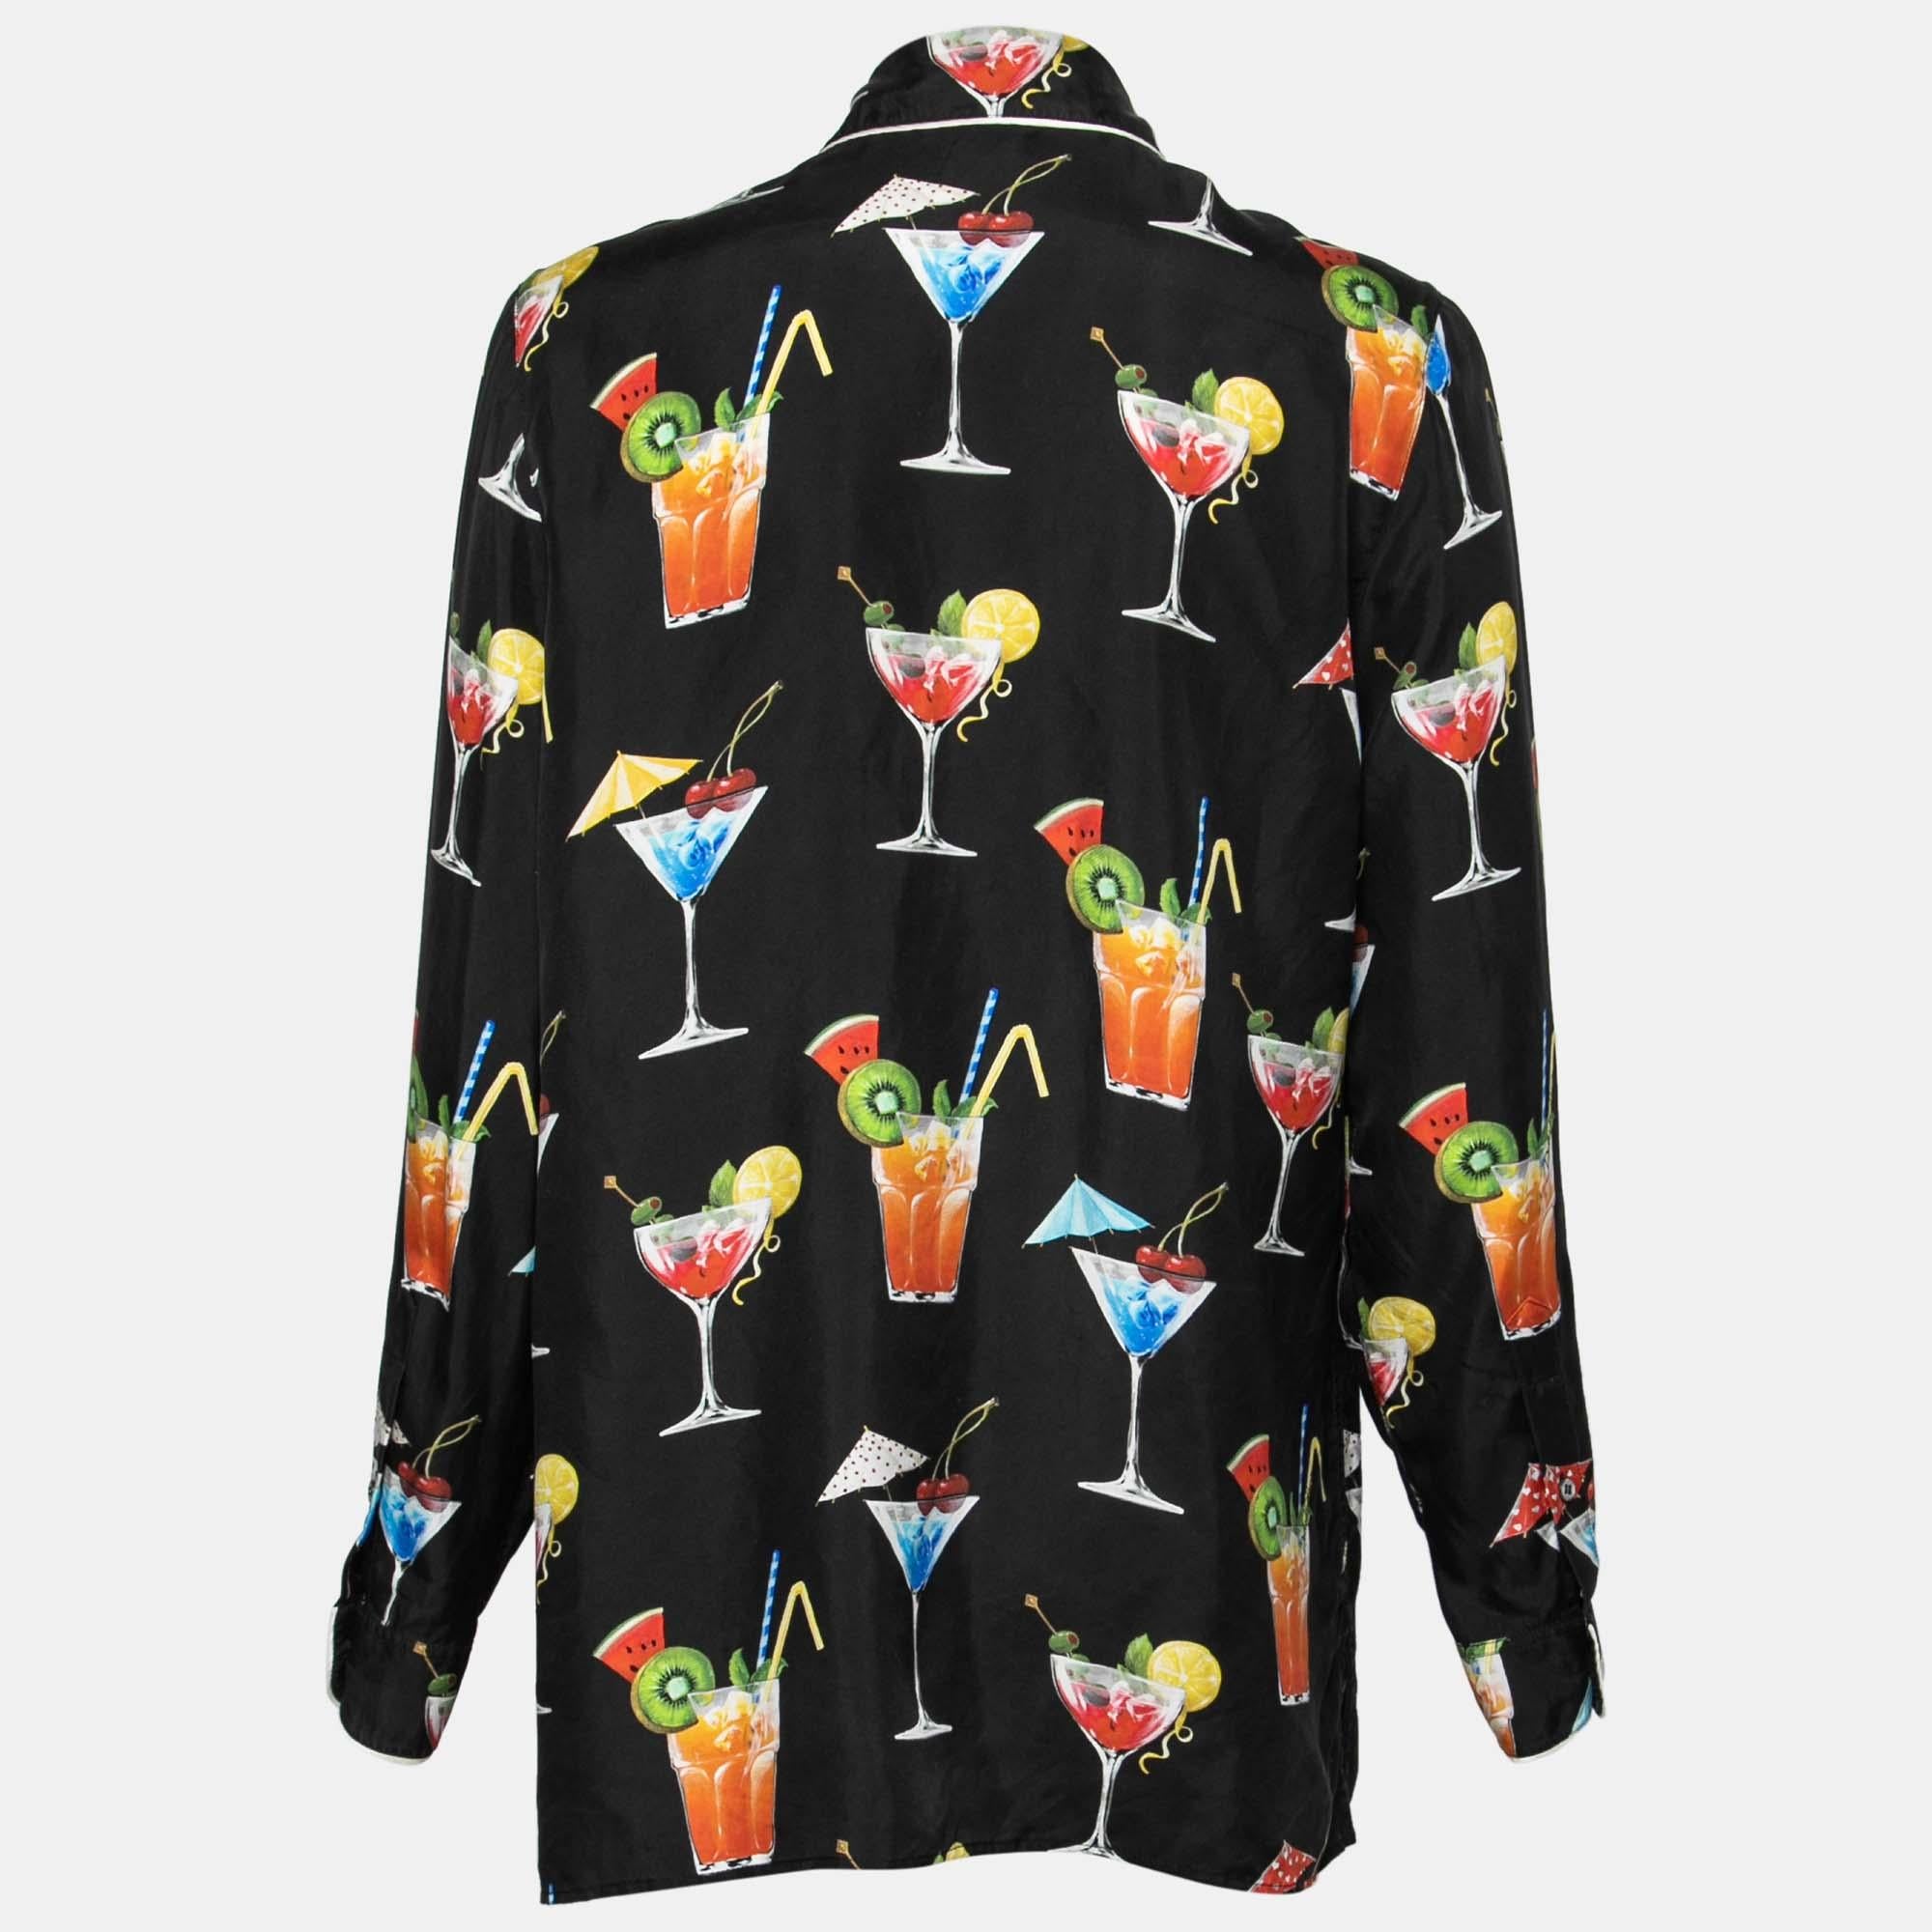 This Dolce & Gabbana pajama shirt is truly luxurious yet comfortable! It has been stitched meticulously from silk and flaunts an eye-catching cocktail print all over. It has a buttoned front and a flattering silhouette.

